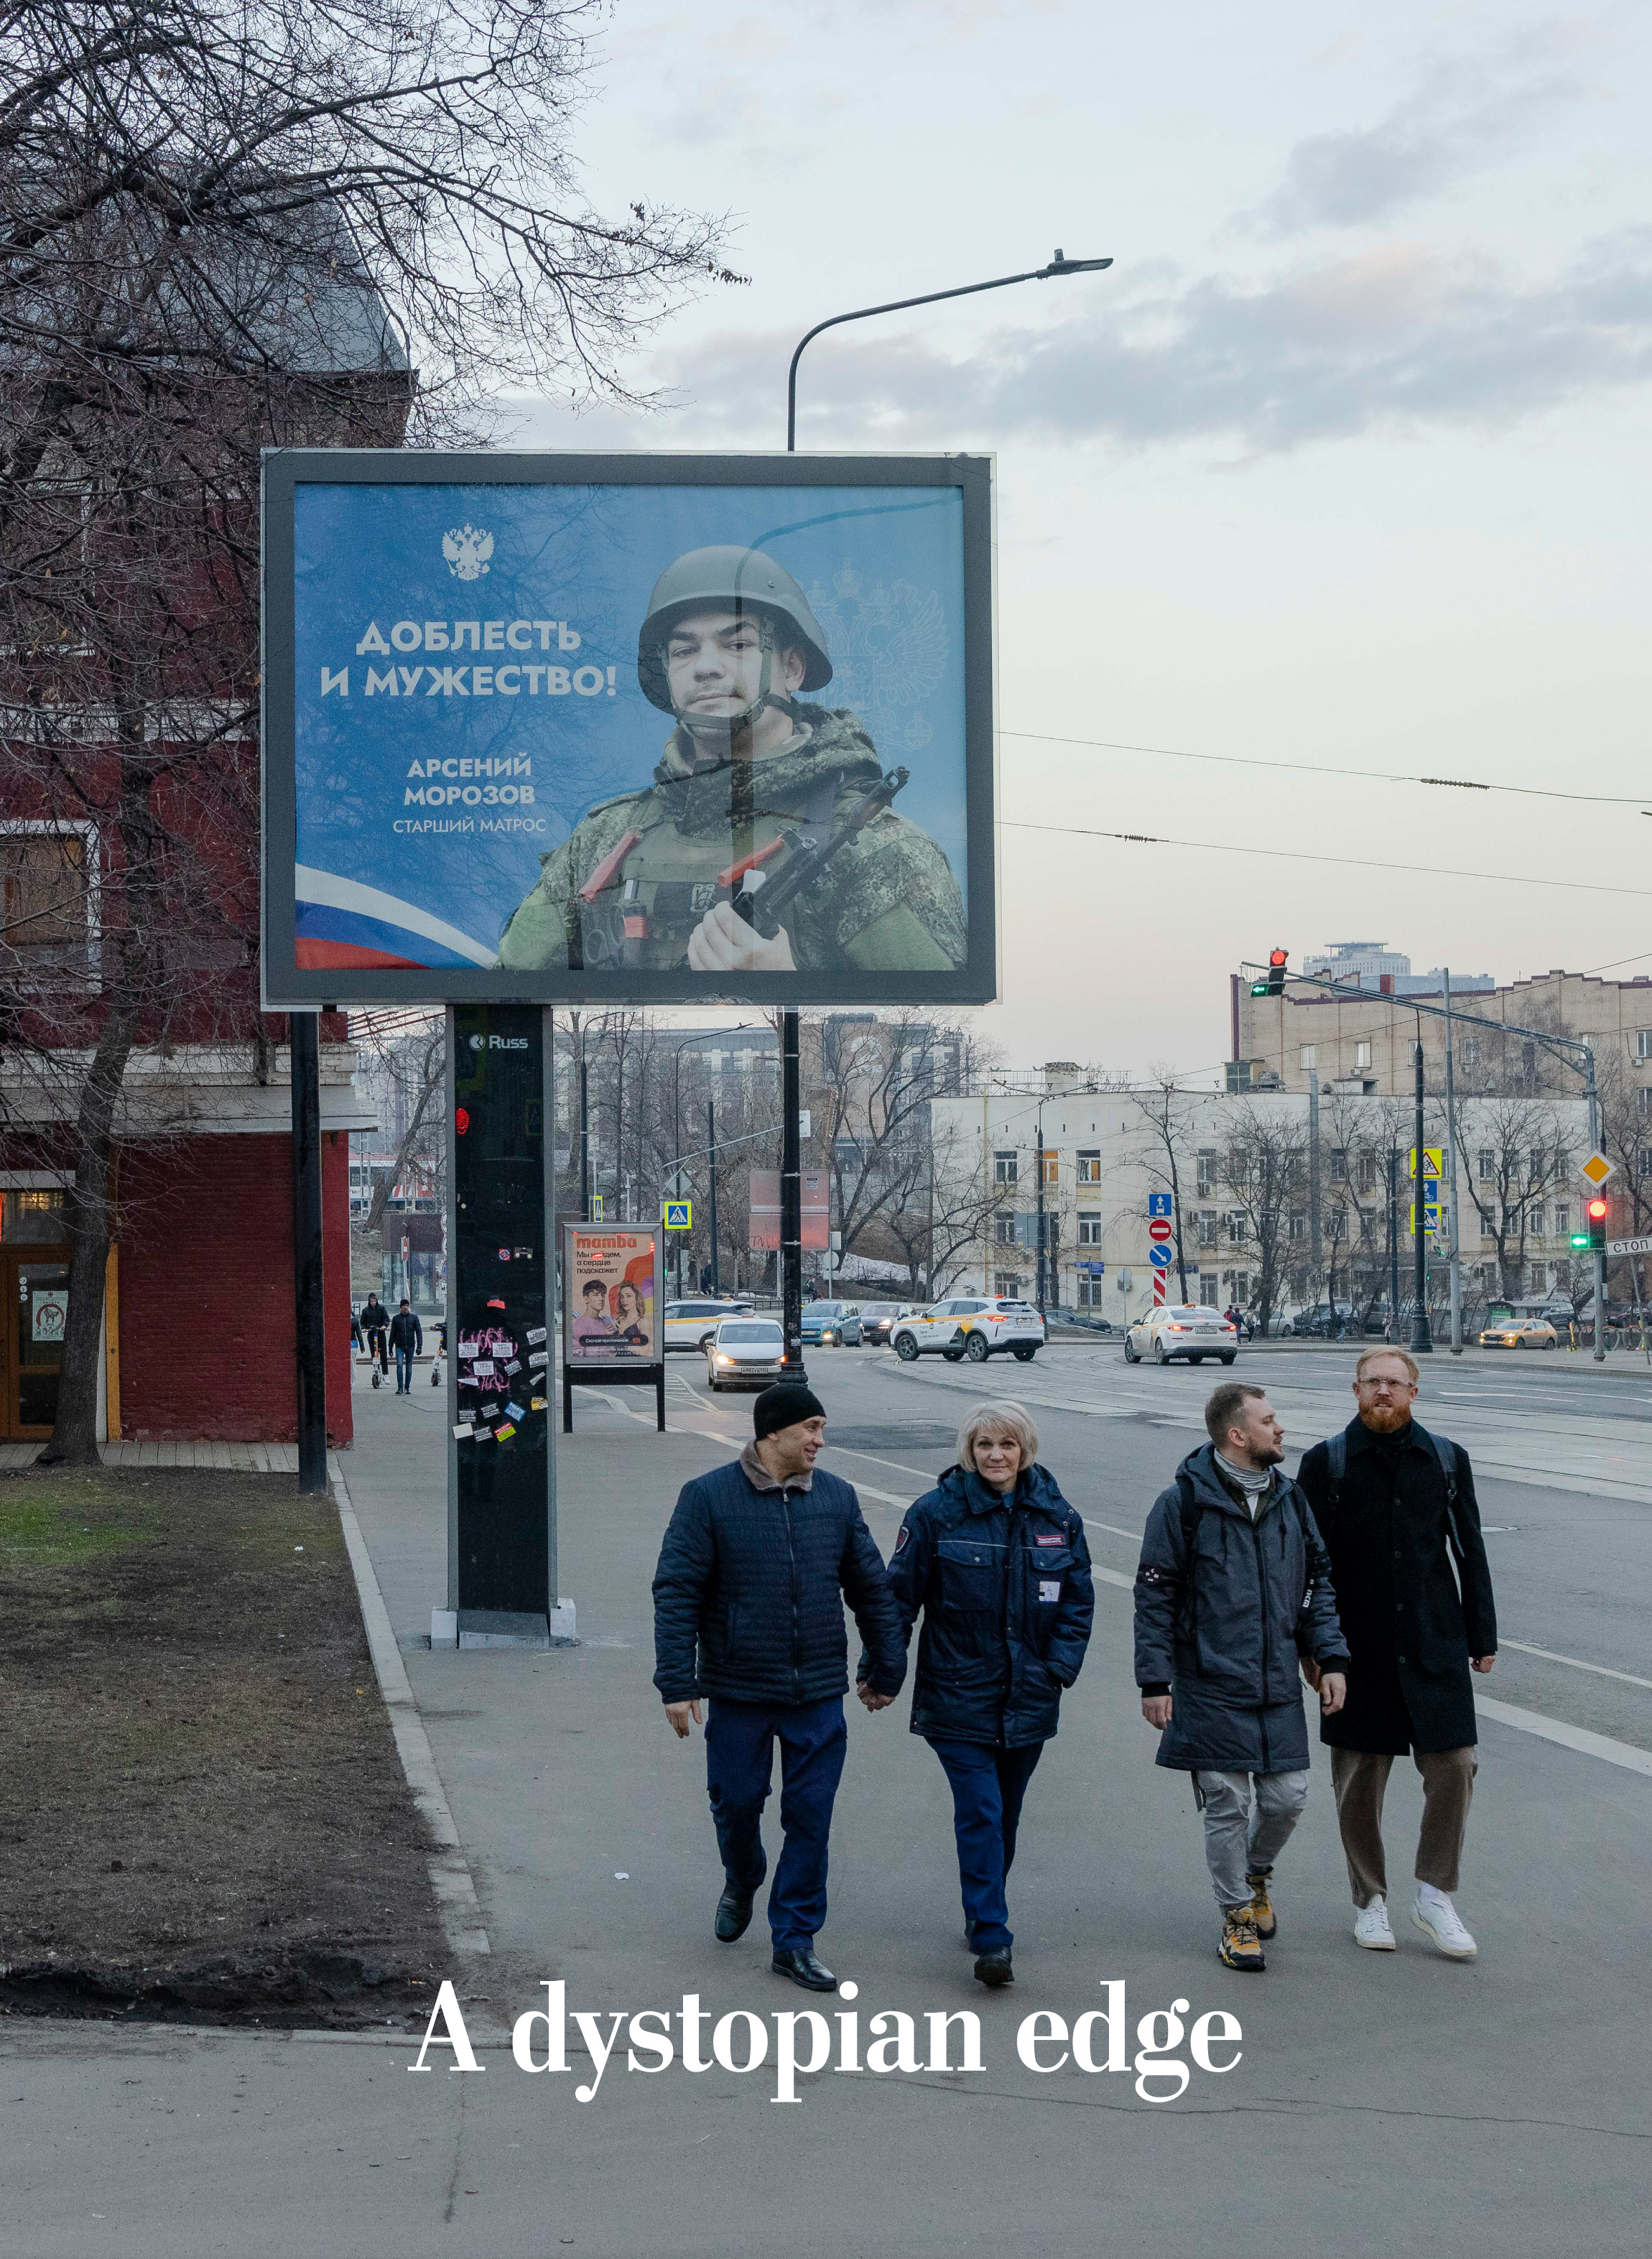 under putin, a militarized new russia rises to challenge u.s. and the west